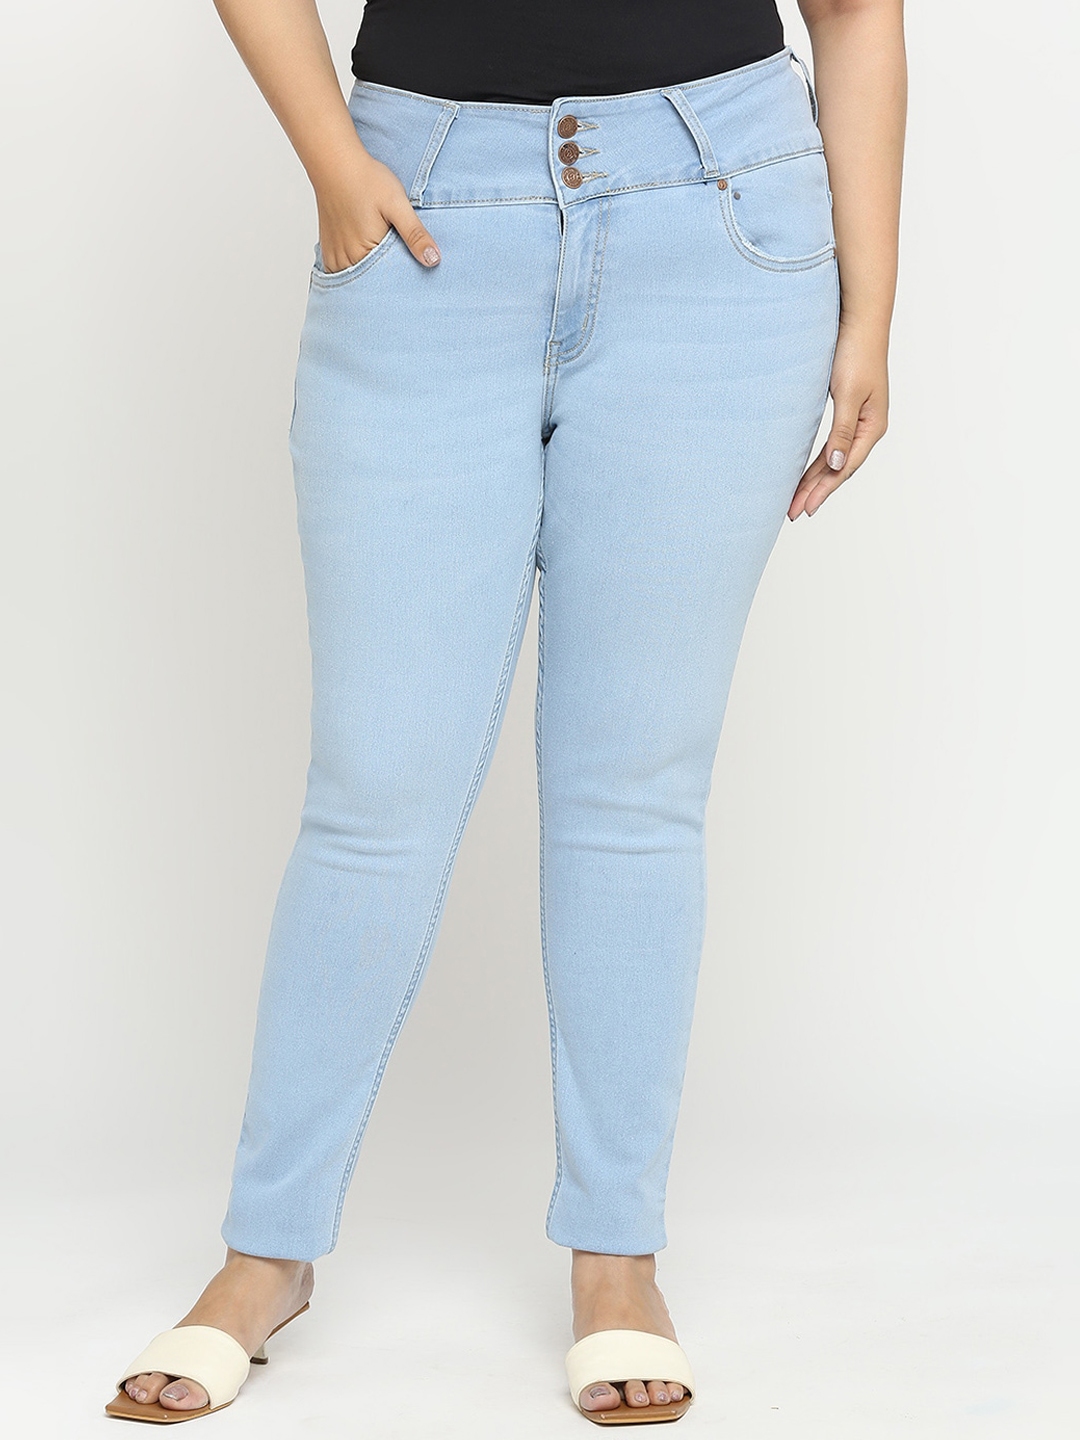 Buy Turning Blue Women Slim Fit High Rise Stretchable Jeans